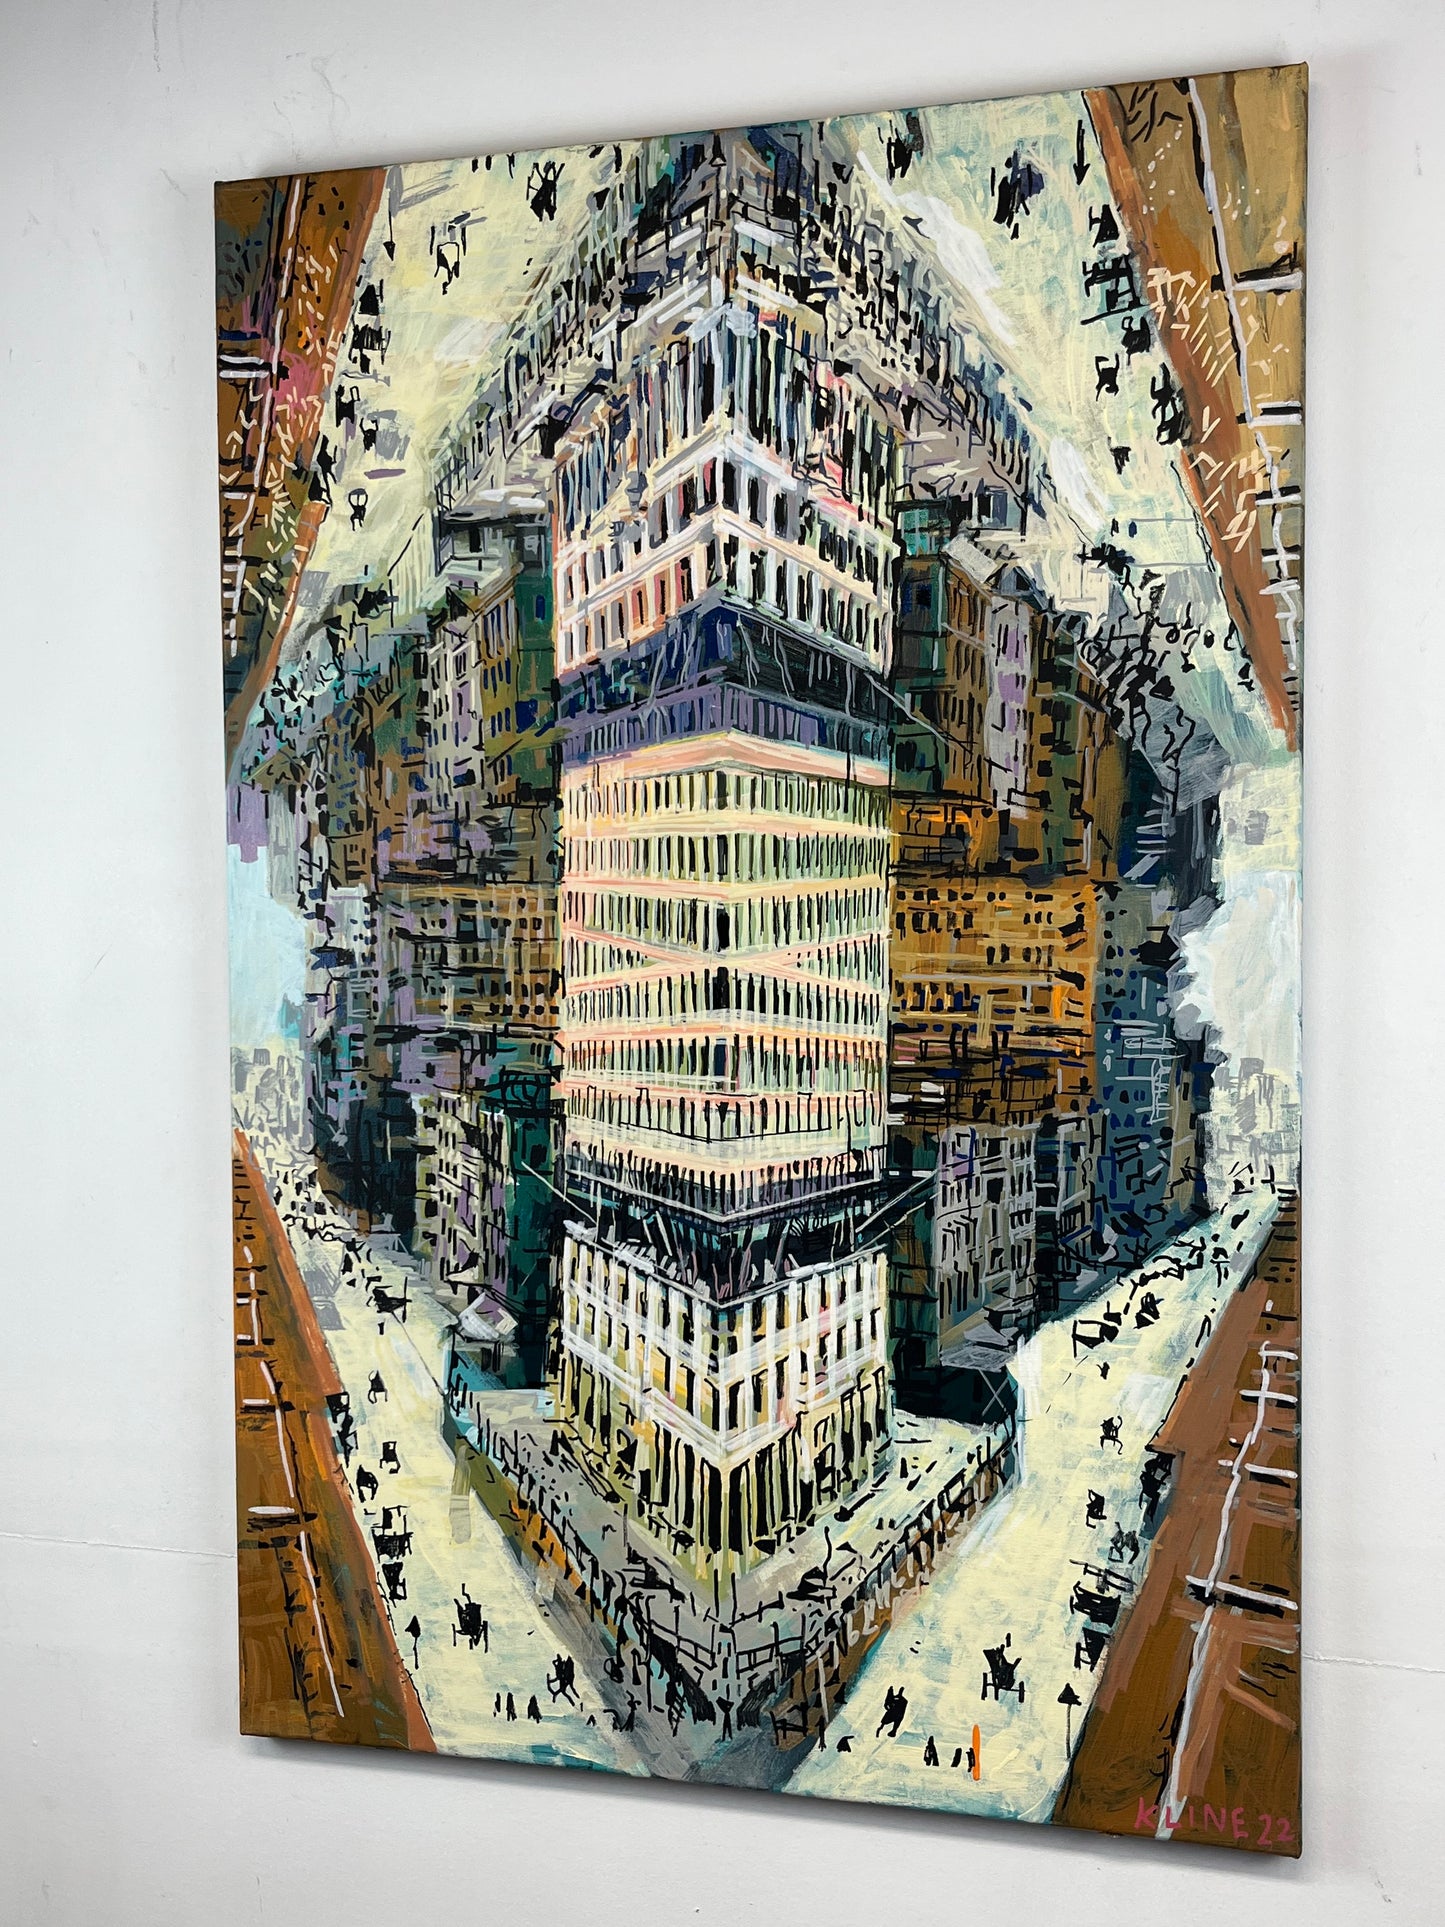 (SOLD) The Flat Iron Building. Acrylic and Oil Markers on Canvas. 24" x 36". John Kline Artwork